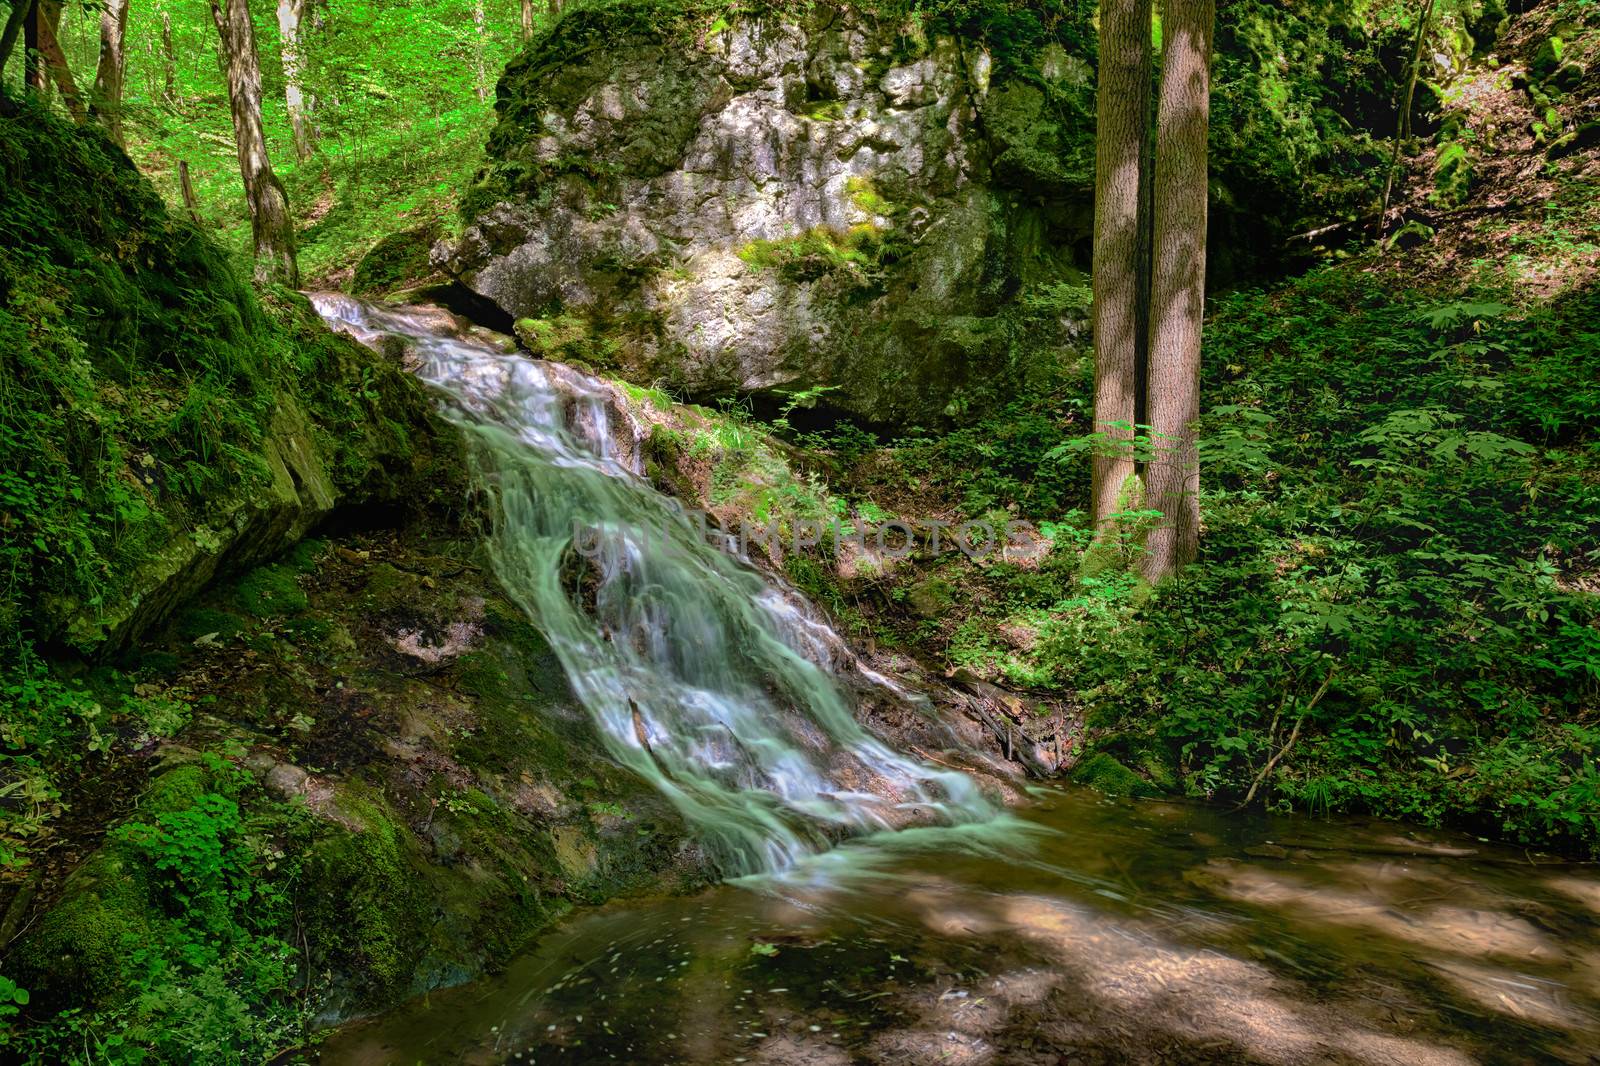 The river in the forest w waterfalls- HDR by hanusst